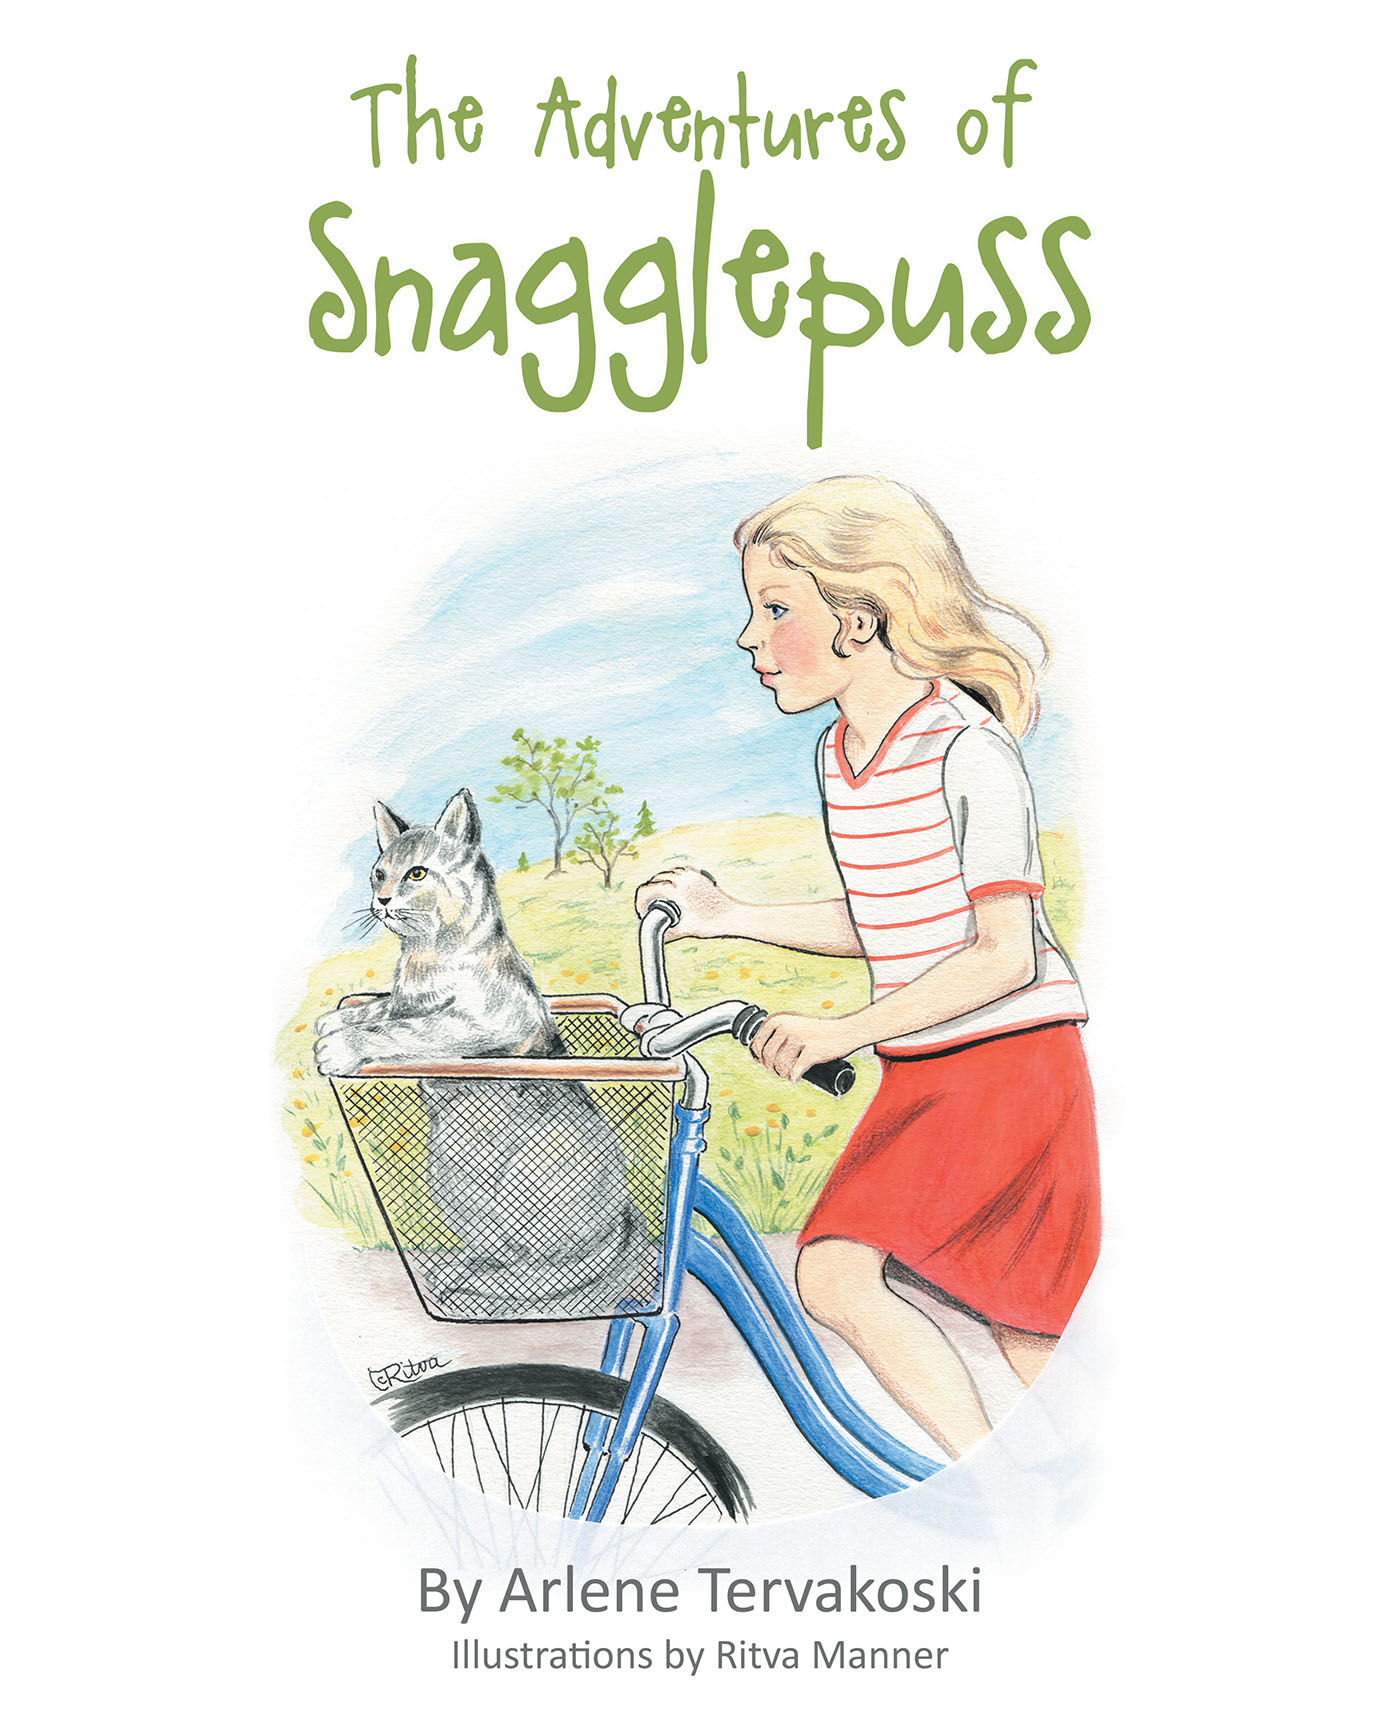 Author Arlene Tervakoski’s New Book, "The Adventures of Snagglepuss," is a Charming Story of a Cat’s Journey to Find His Family After They Move Away from Their Farm